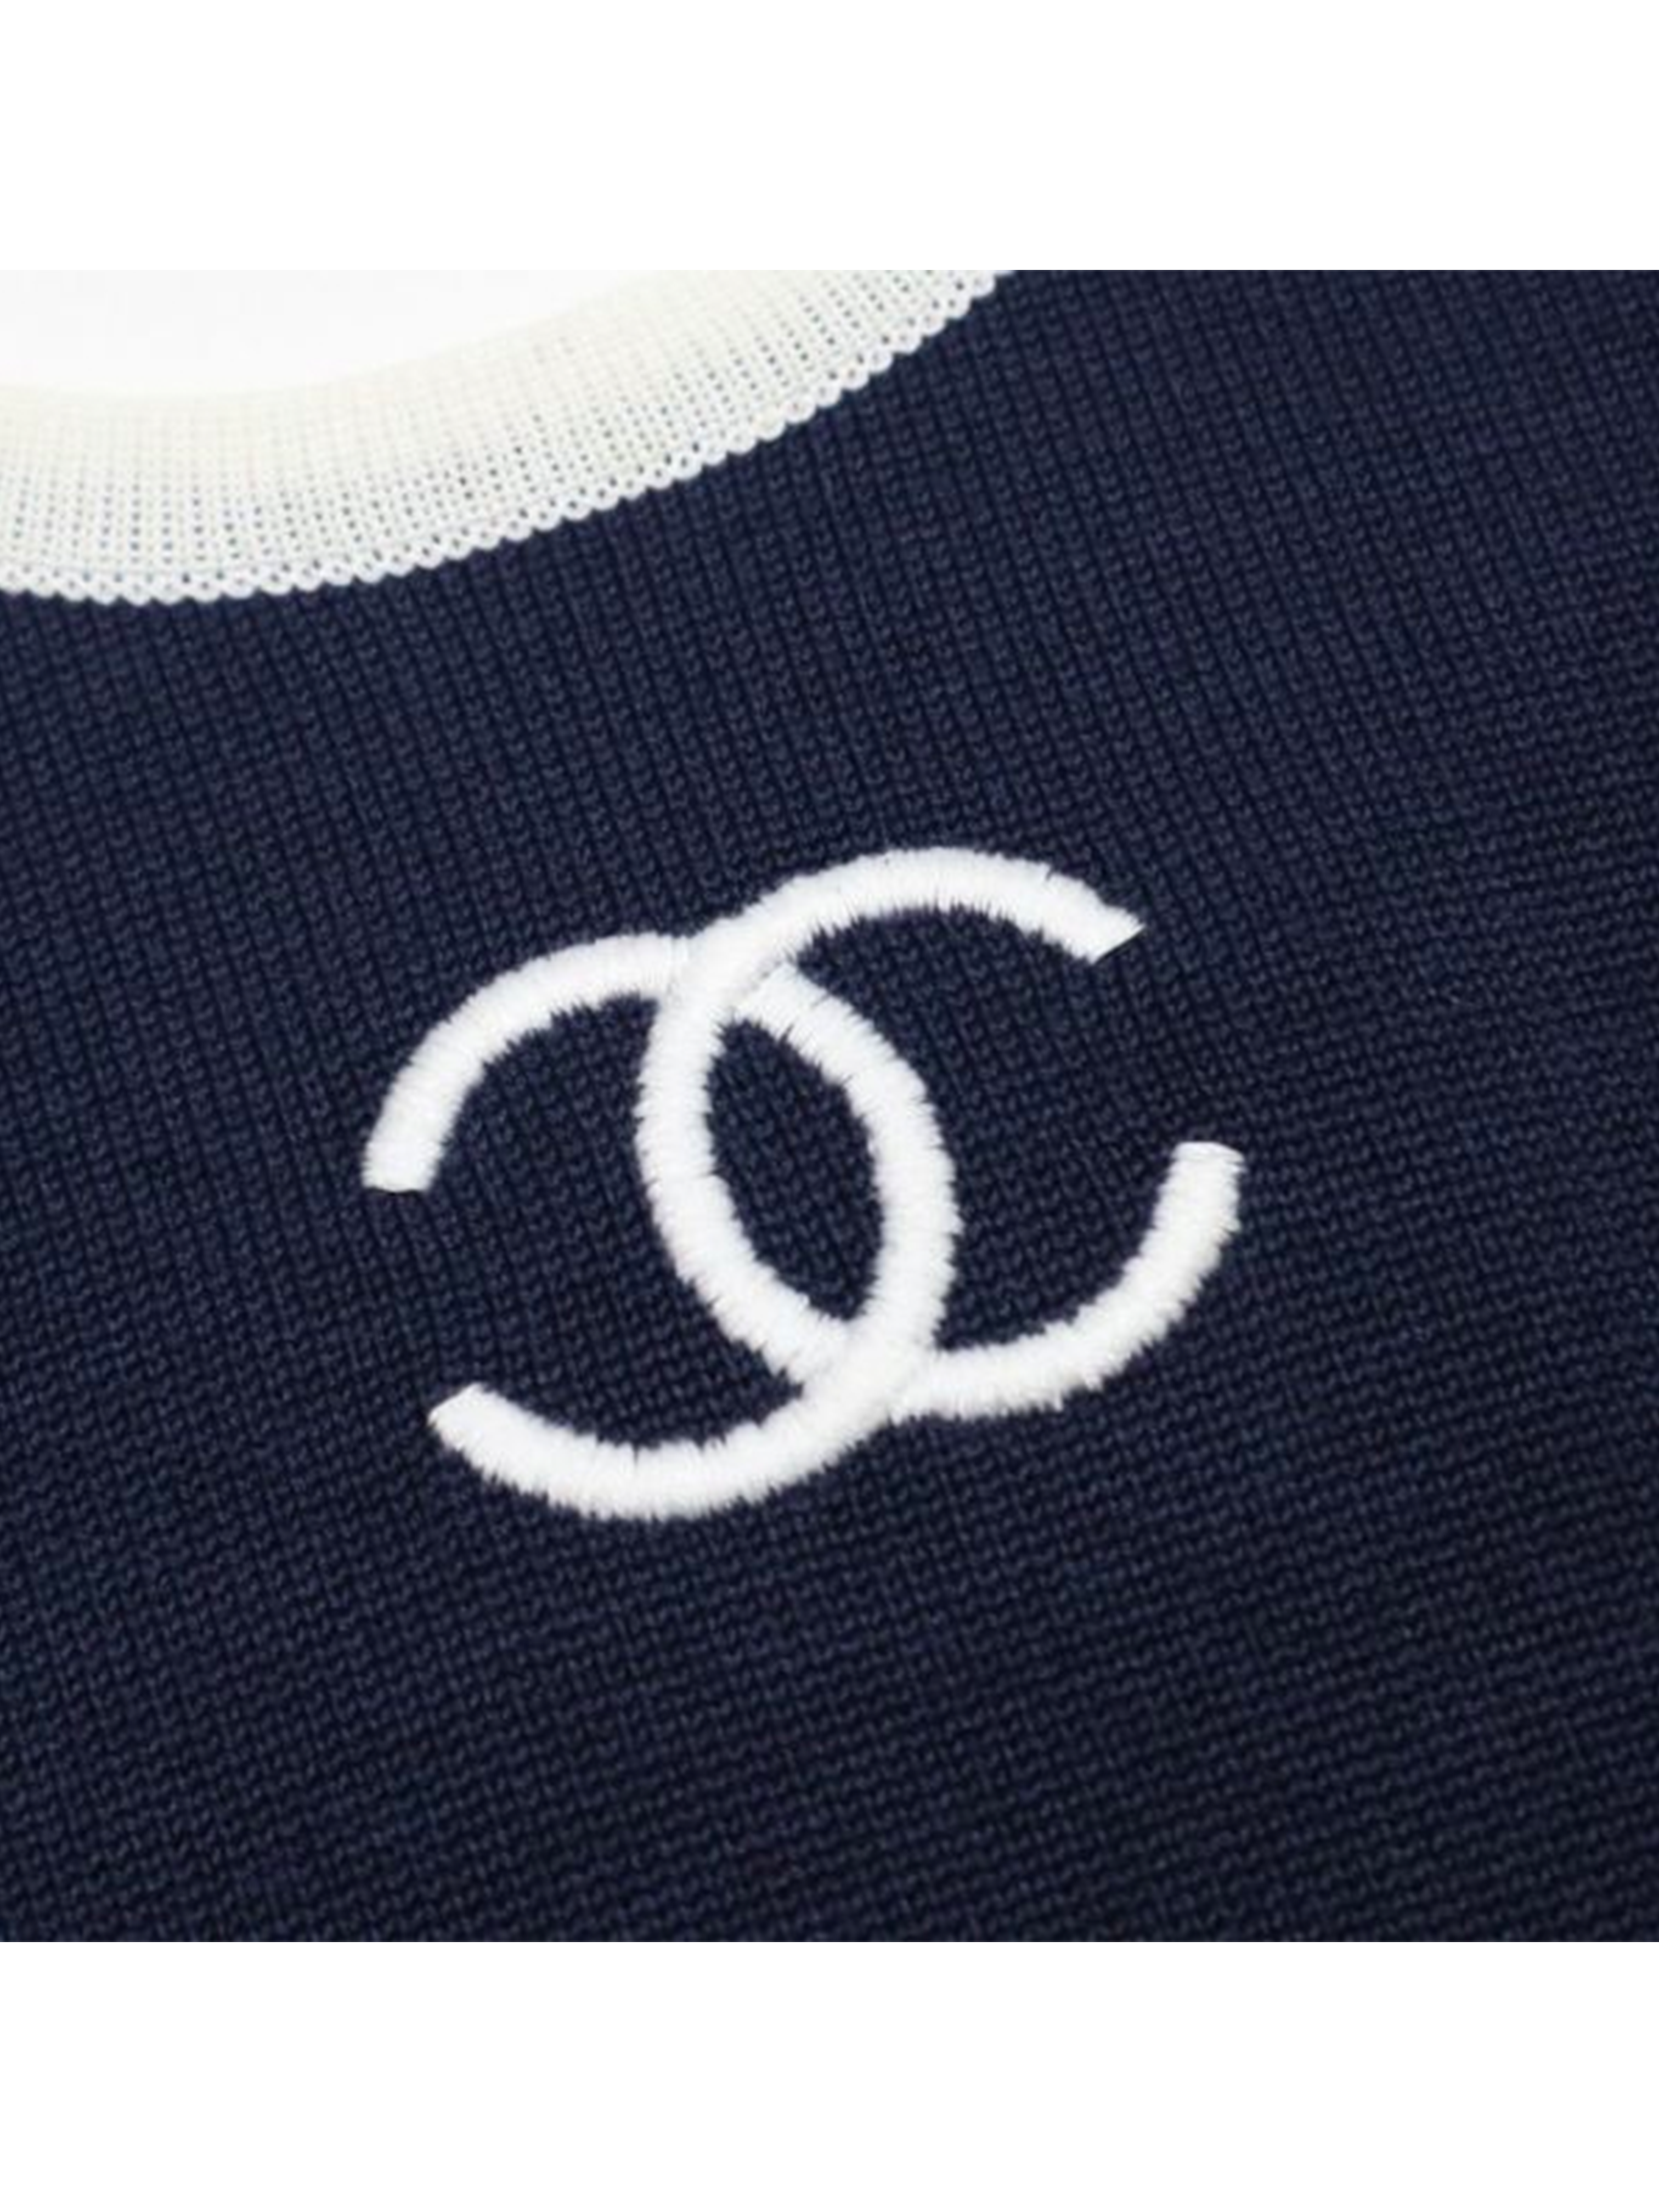 Chanel Ultra Rare Navy Knit Dress/Camisole